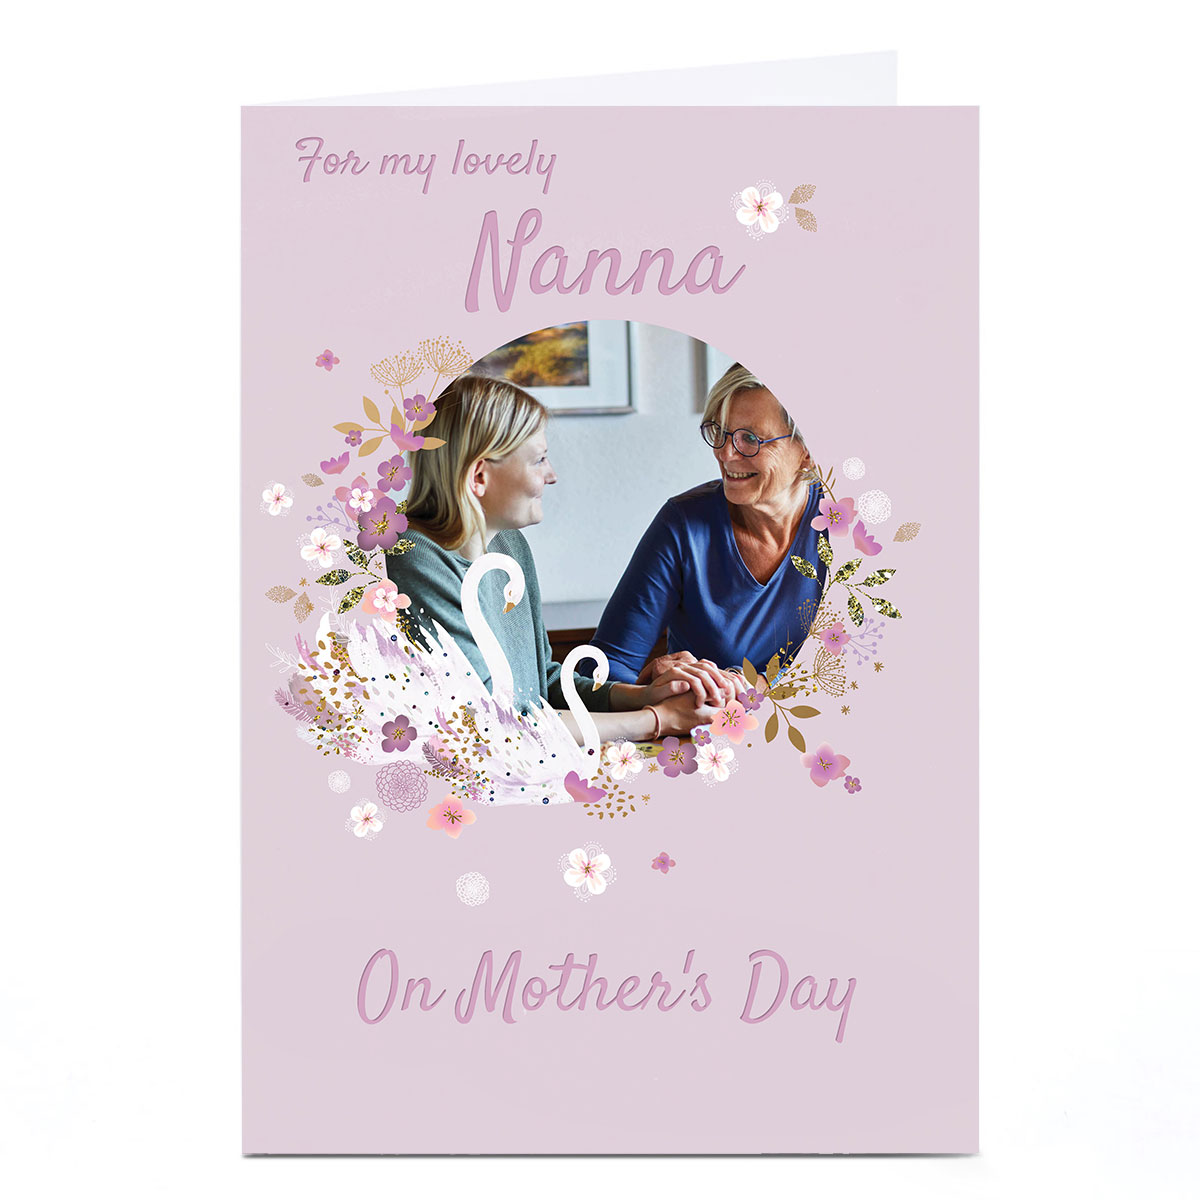 Photo Kerry Spurling Mother's Day Card - Nanna, Swans  